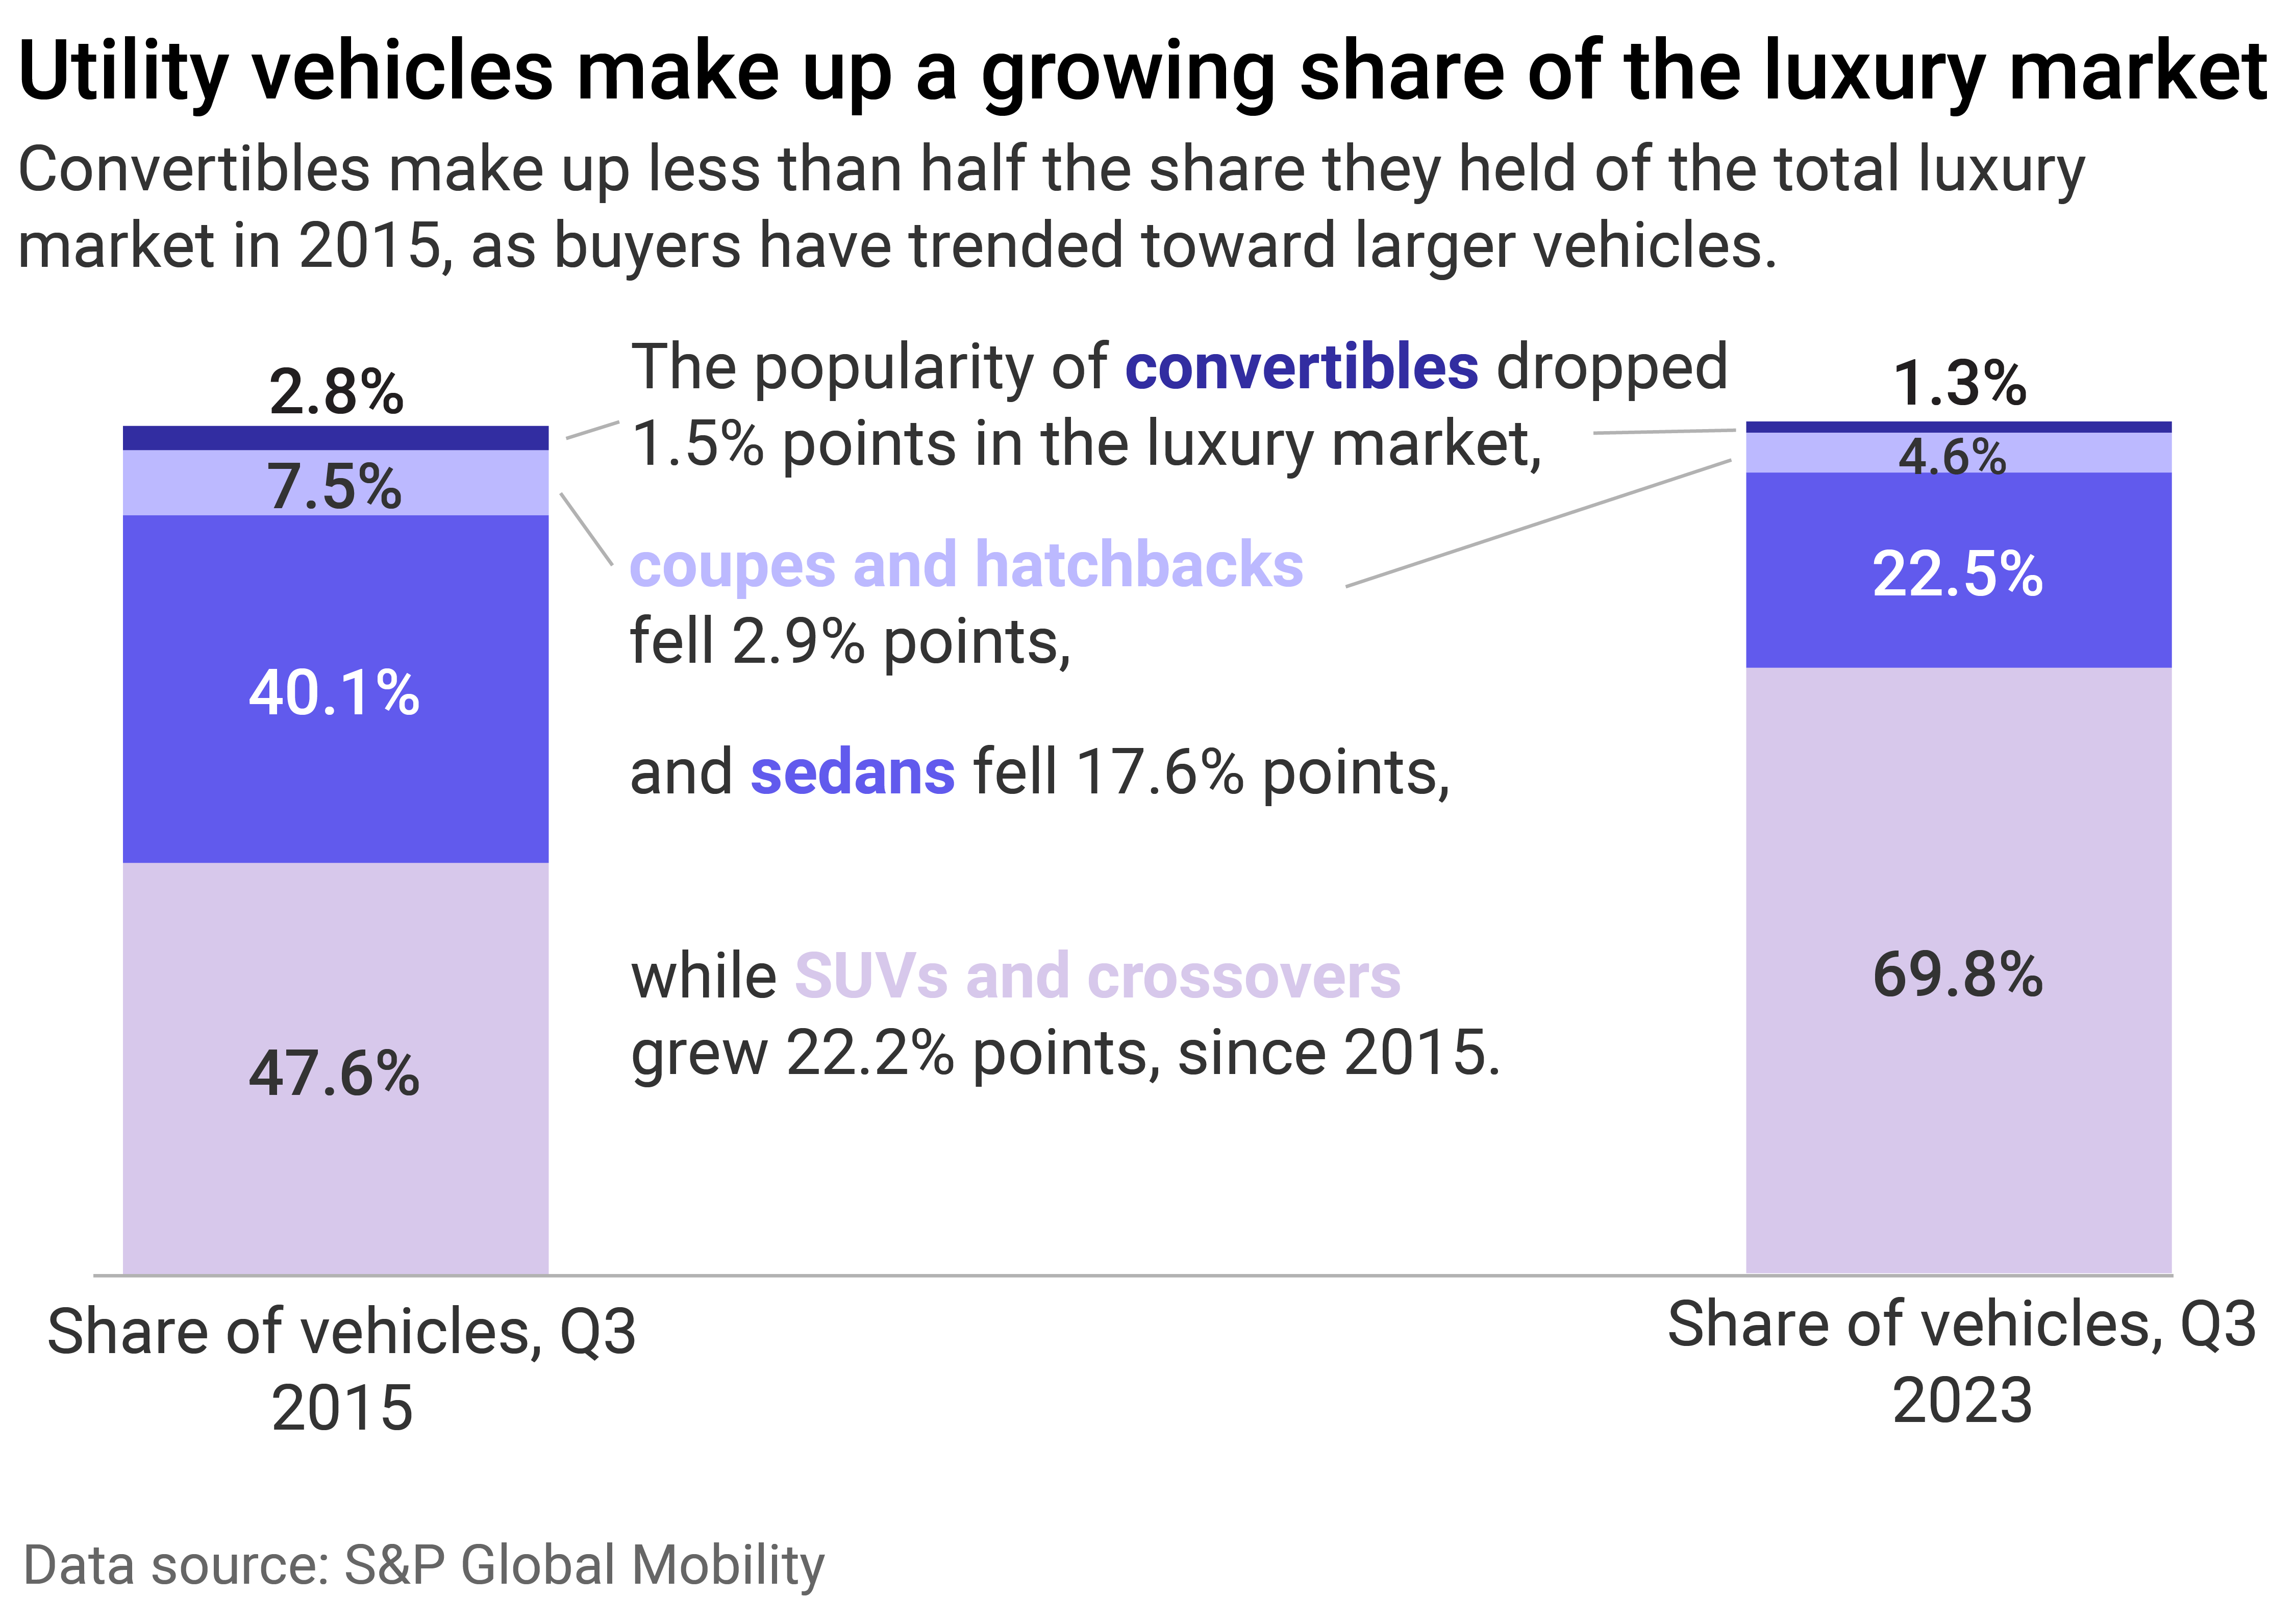 A bar chart showing that utility vehicles make up a growing share of the luxury market. Convertibles make up less than half the share they held of the total luxury market in 2015, as buyers have trended toward larger vehicles. The popularity of convertibles dropped 1.5% points in the luxury market, coupes and hatchbacks fell 2.9%, and sedans fell 17.6% points, while SUVs and crossovers grew 22.2% points, since 2015.